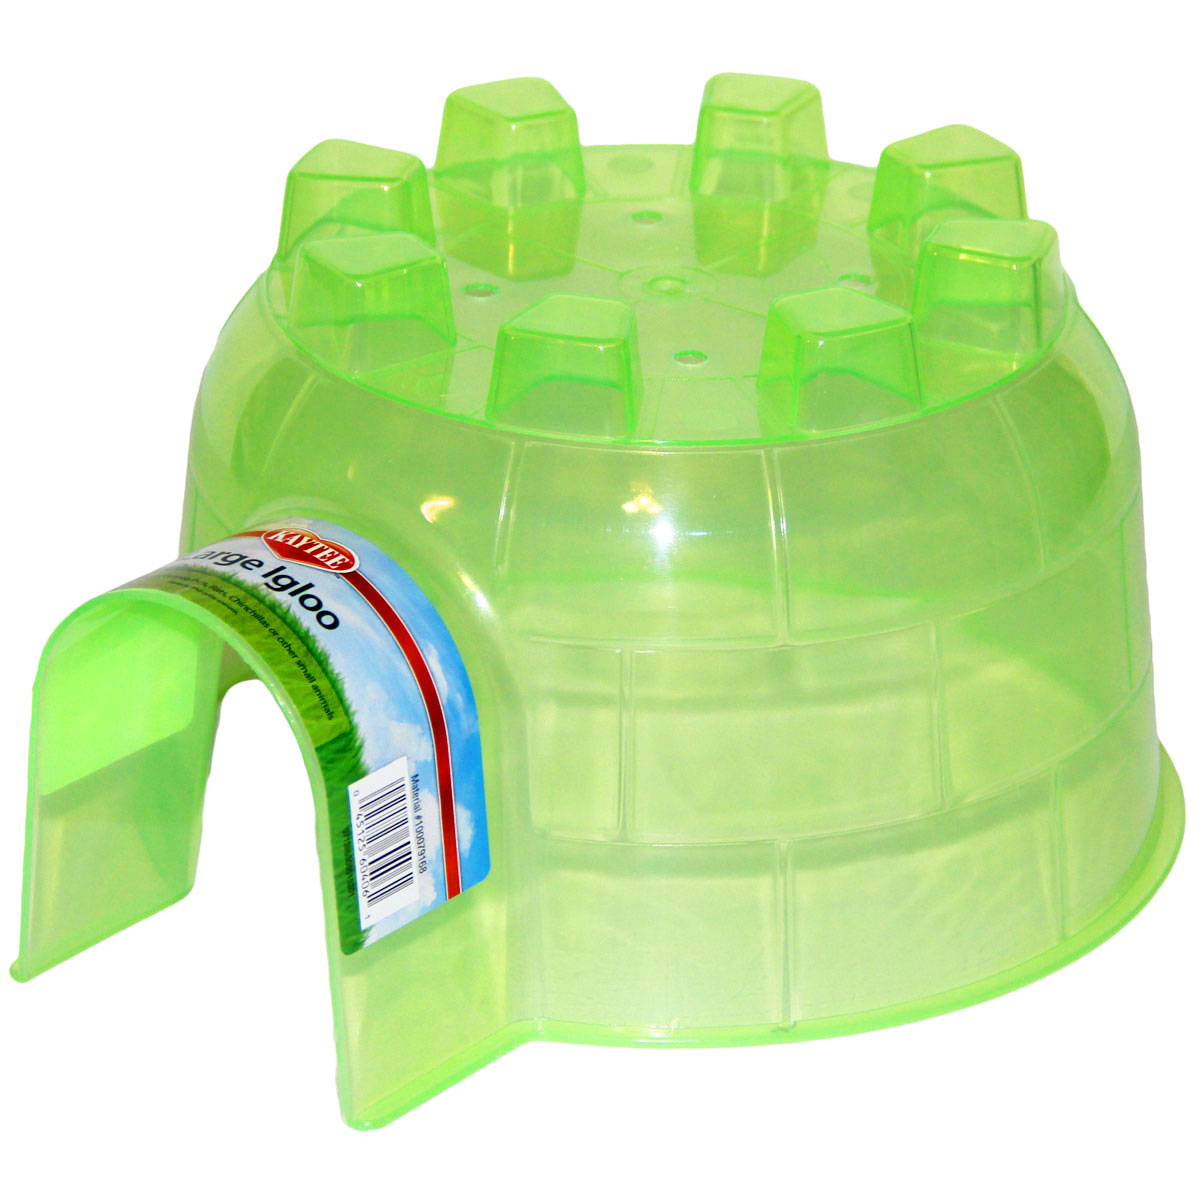 Plastic Pigloos - Igloos for guinea pigs